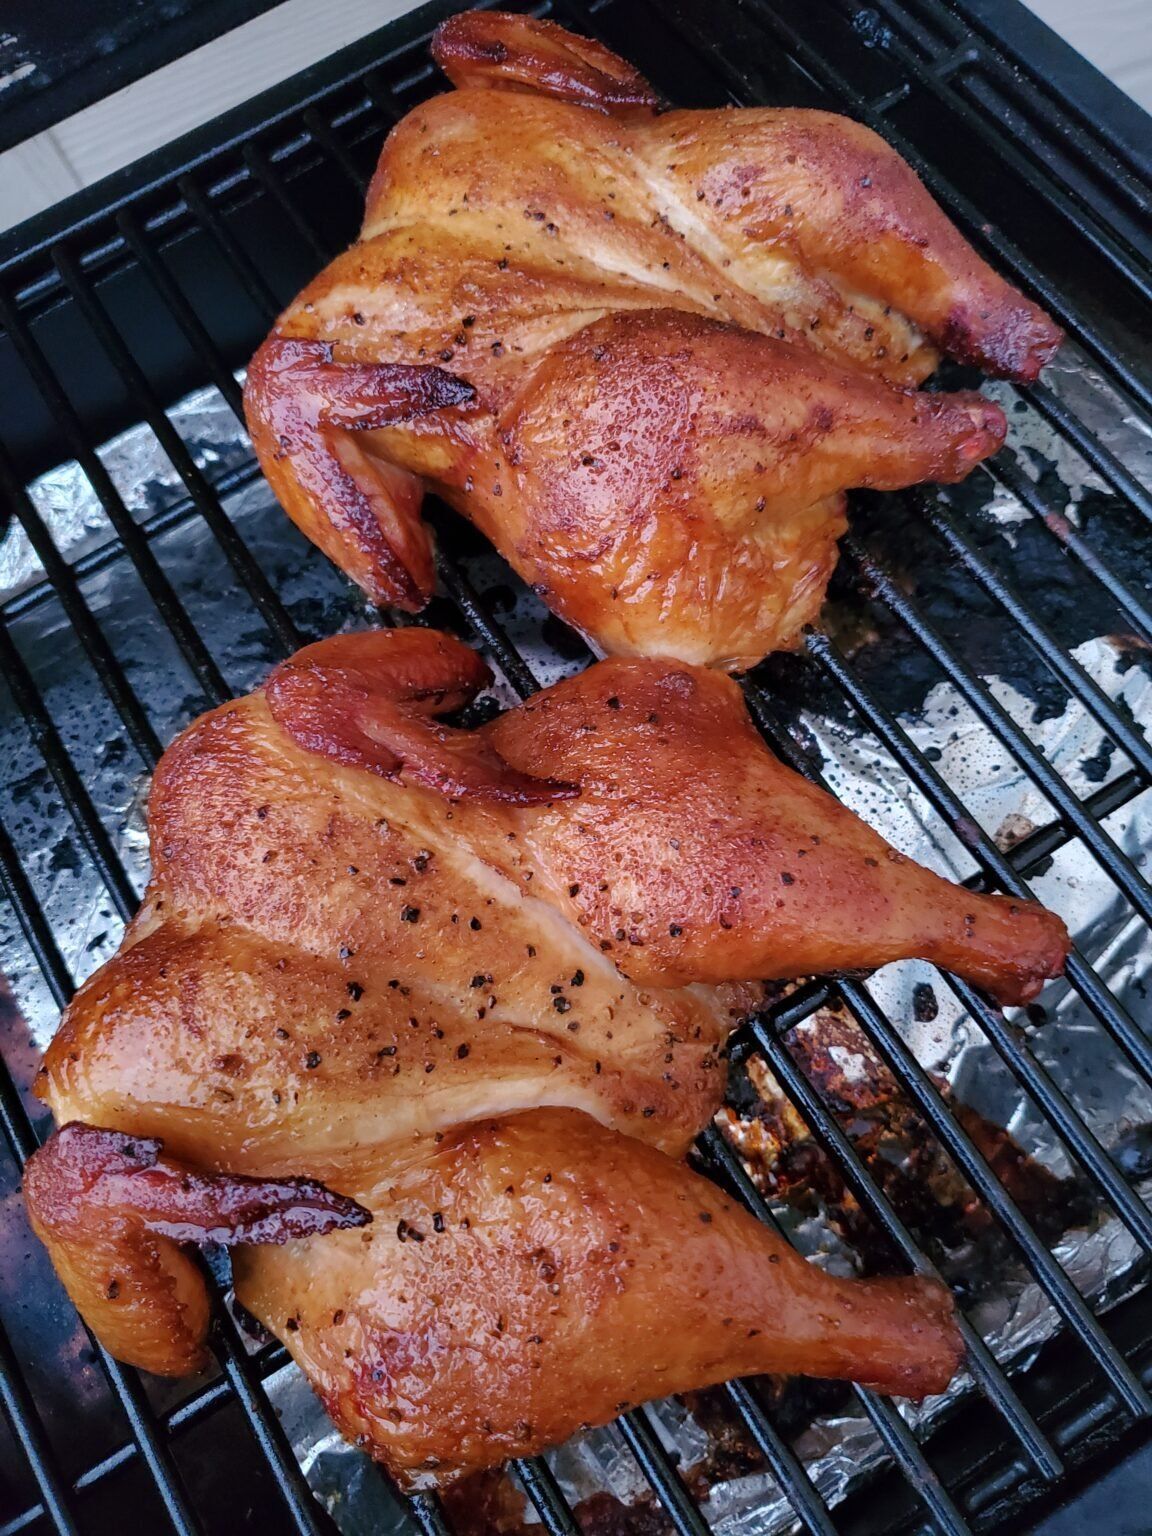 Cornish Game Hens cooking on grill